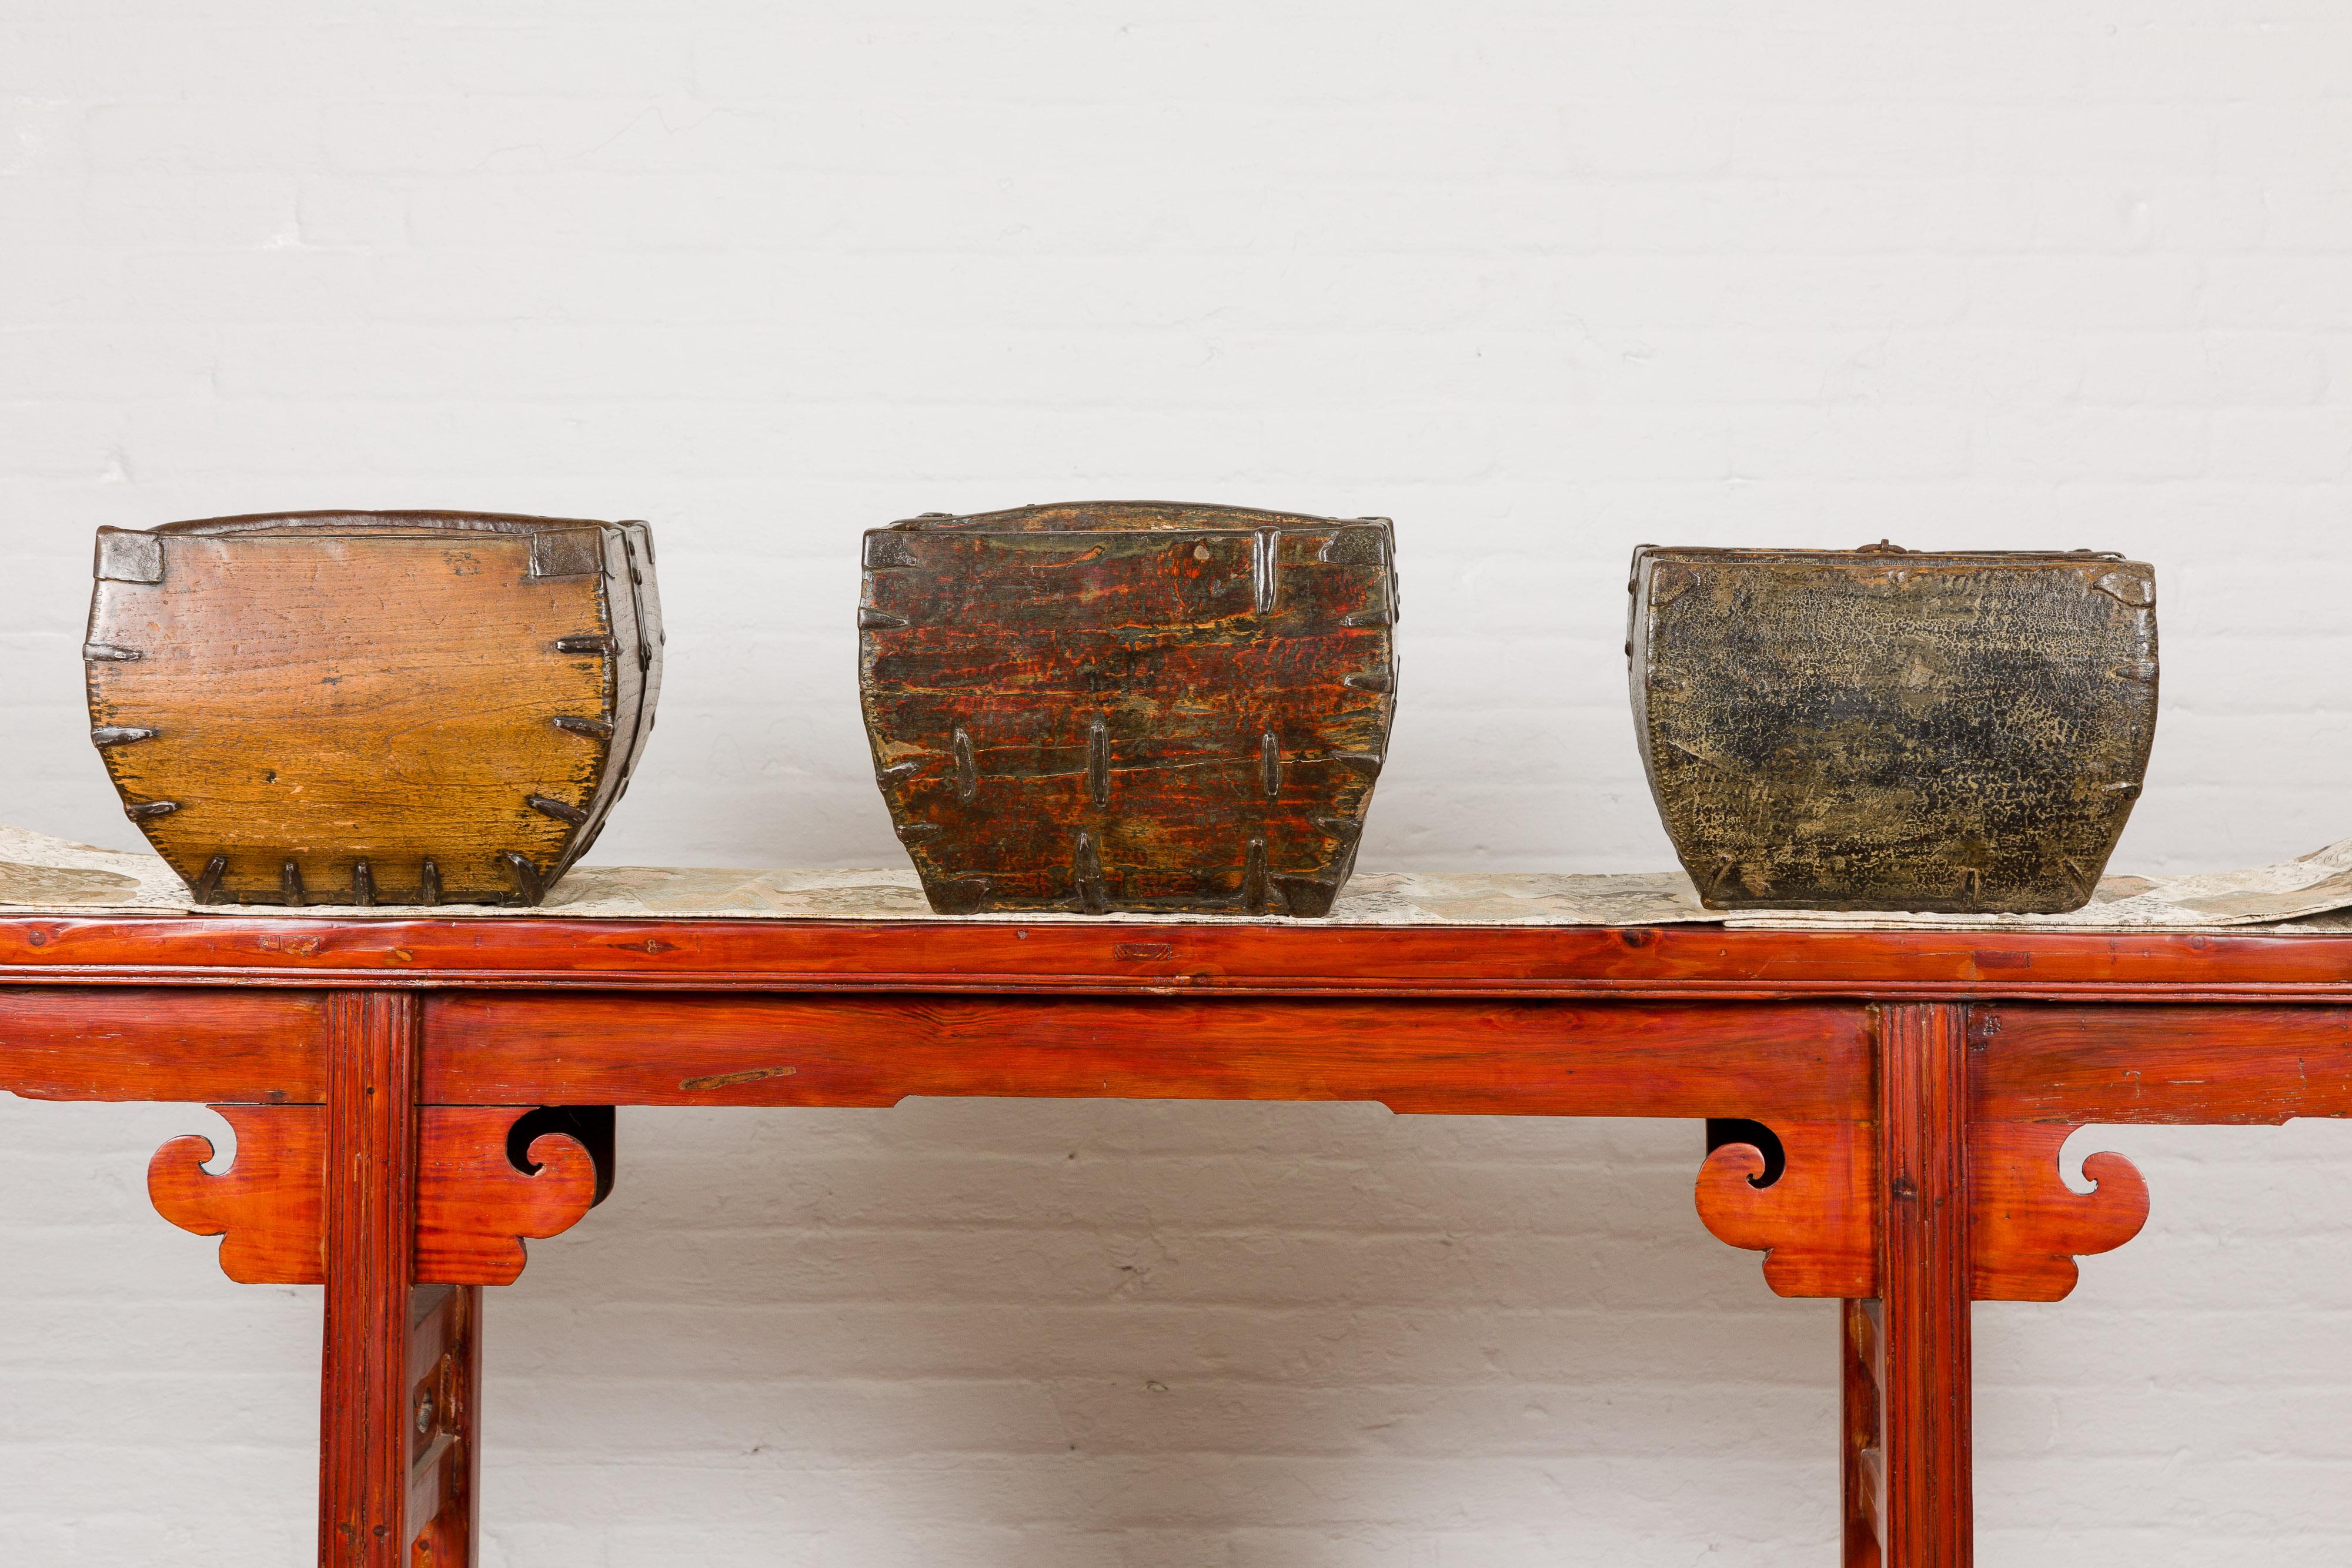 Three rustic Chinese rice measure wooden baskets from the mid 20th century with brown color, handles and metal accents. They are priced and sold individually. Immerse yourself in the rustic charm of these mid-20th century Chinese rice measure